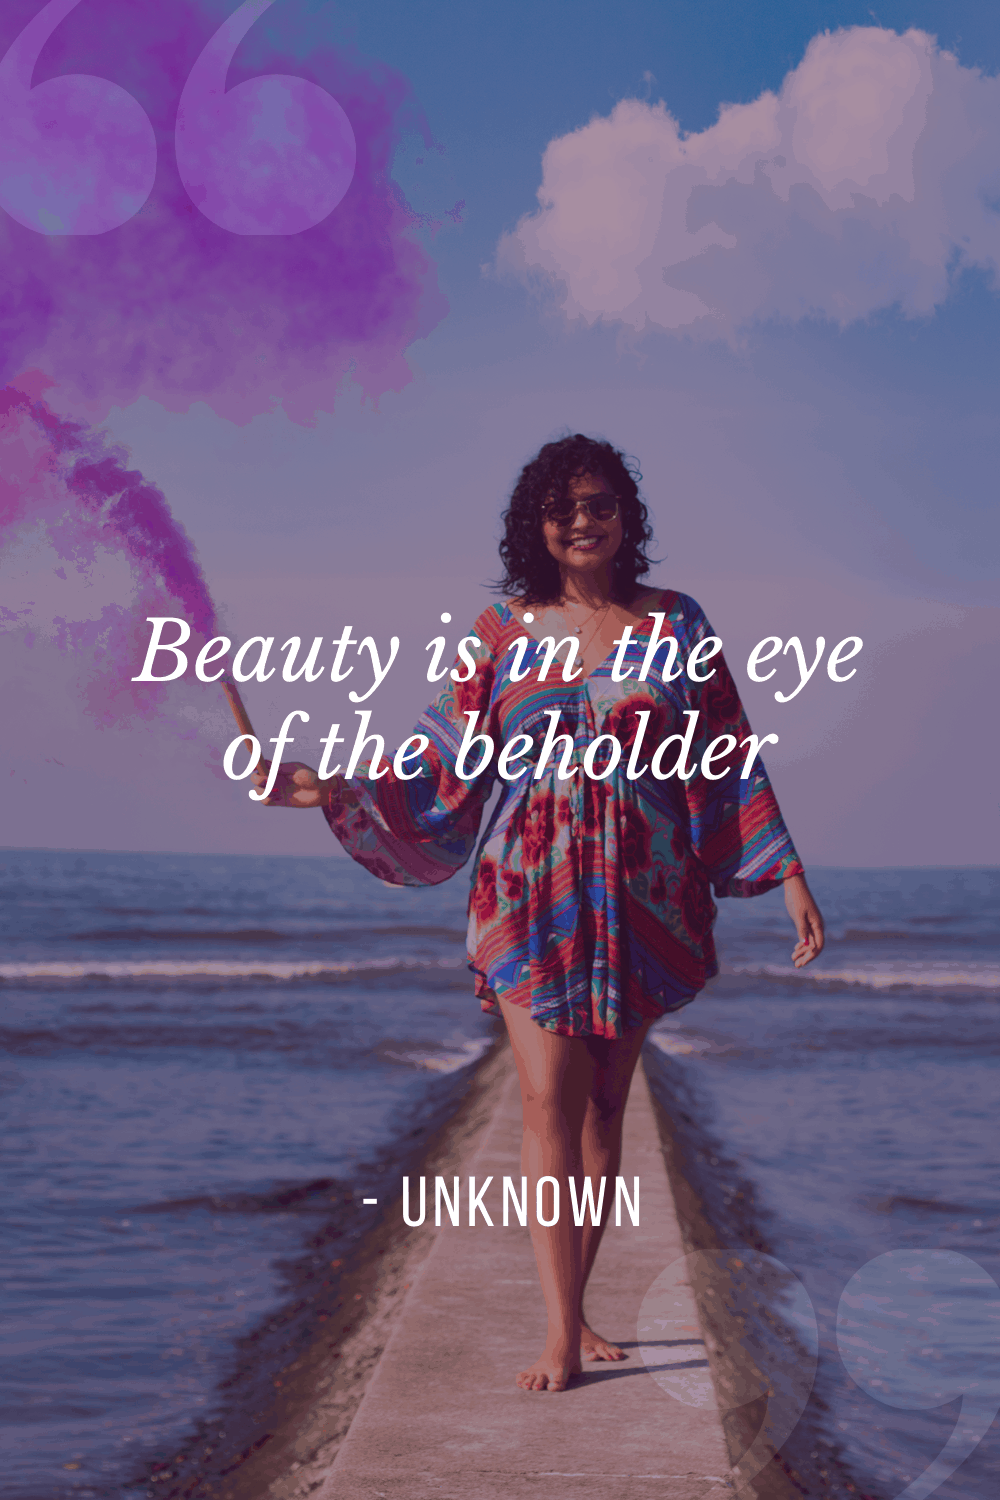 “Beauty is in the eye of the beholder”, Unknown